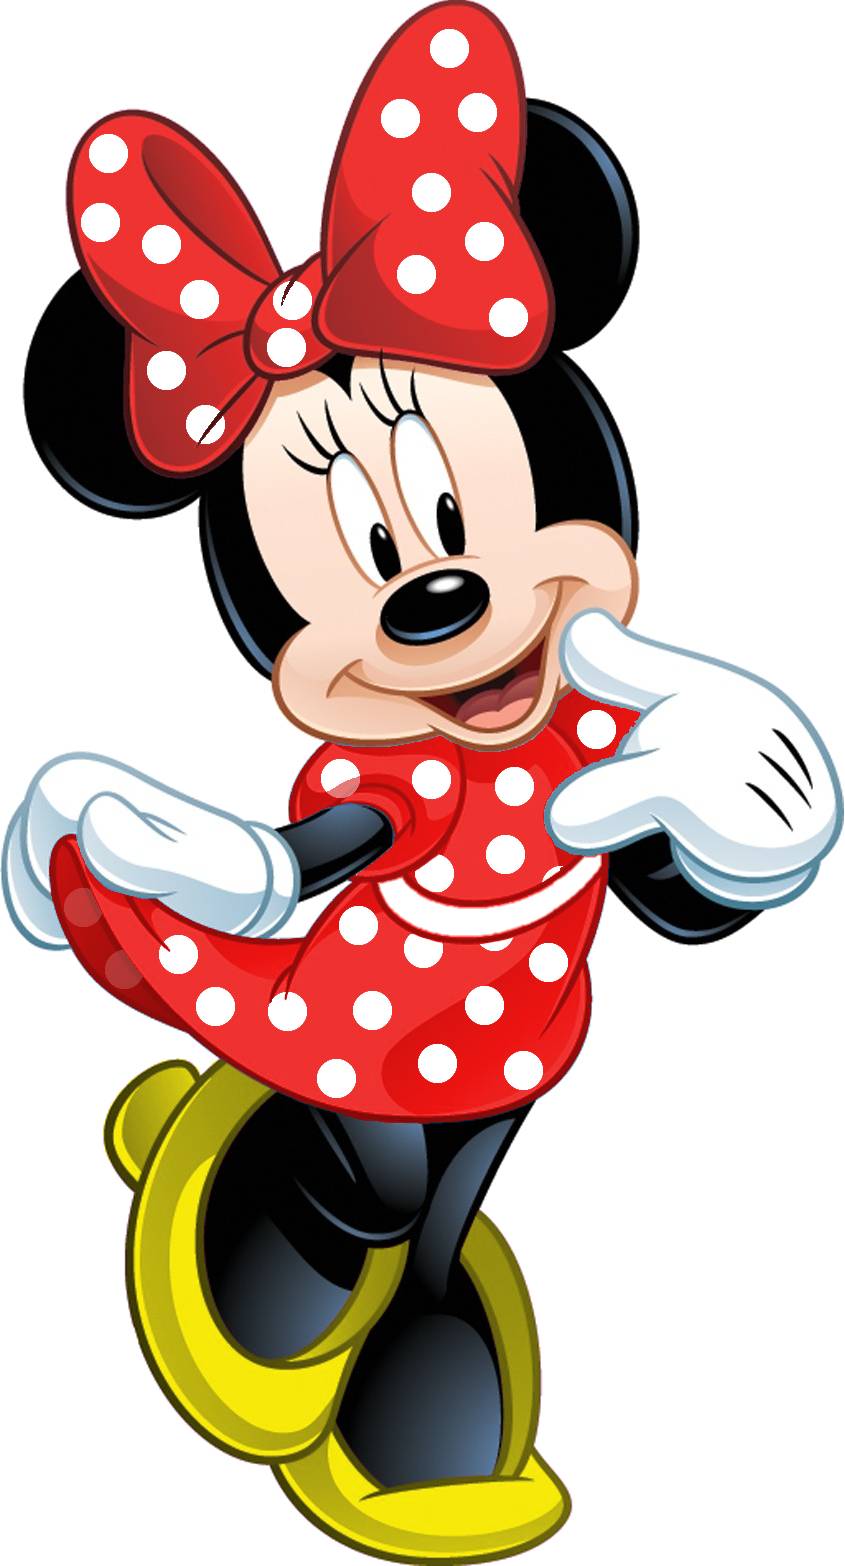 21 Immagini Disney Minnie Free Cliparts That You Can Download To You